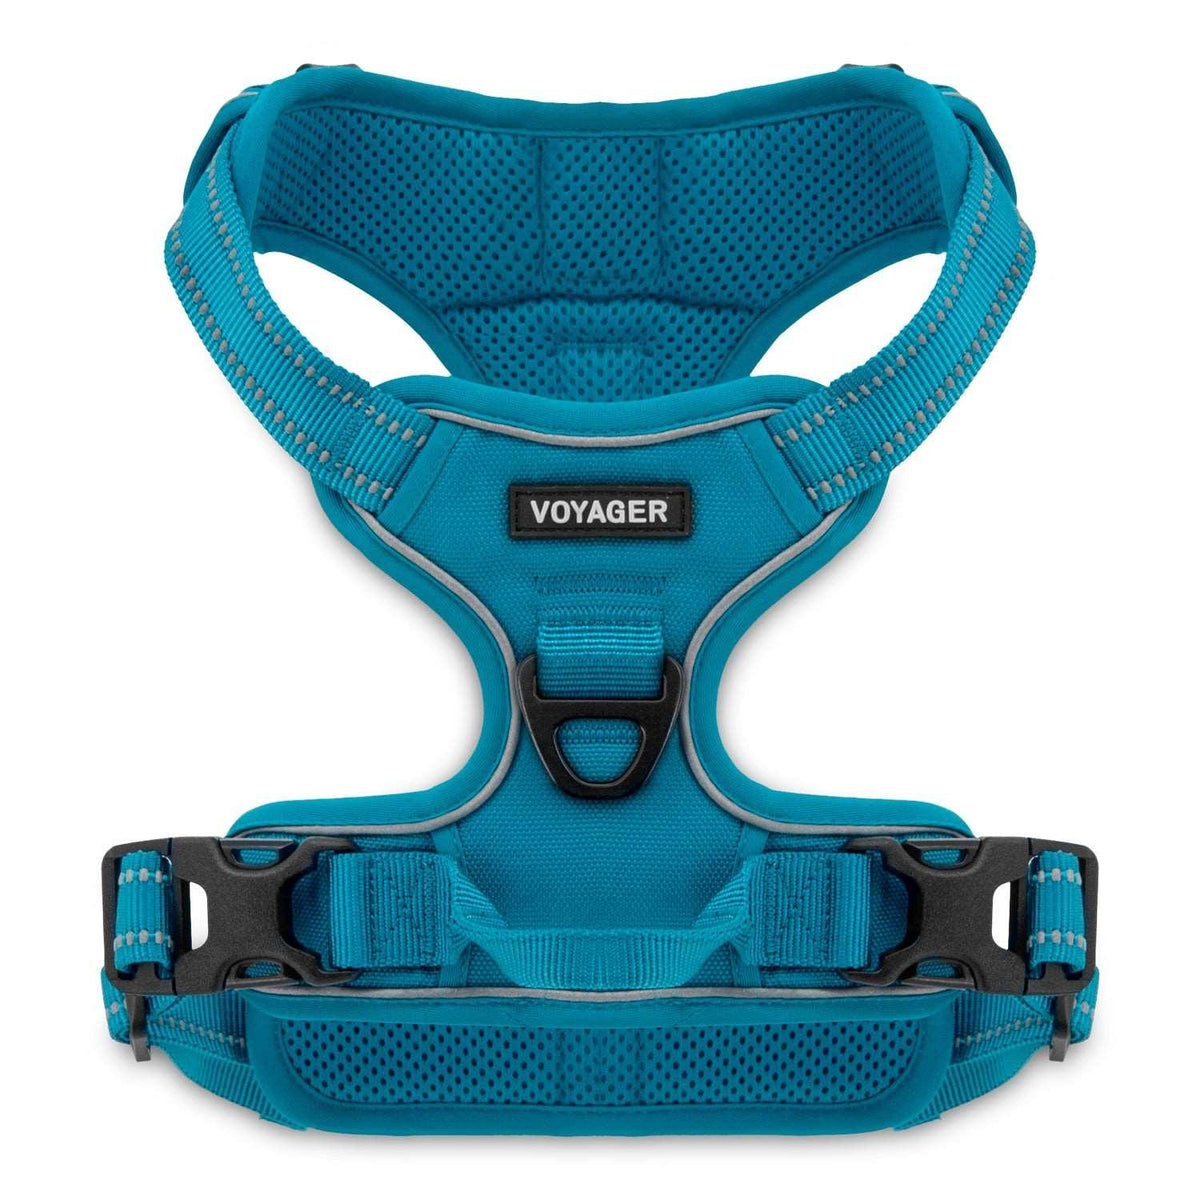 VOYAGER Dual-Attachment Dog Harness in turquoise - Front